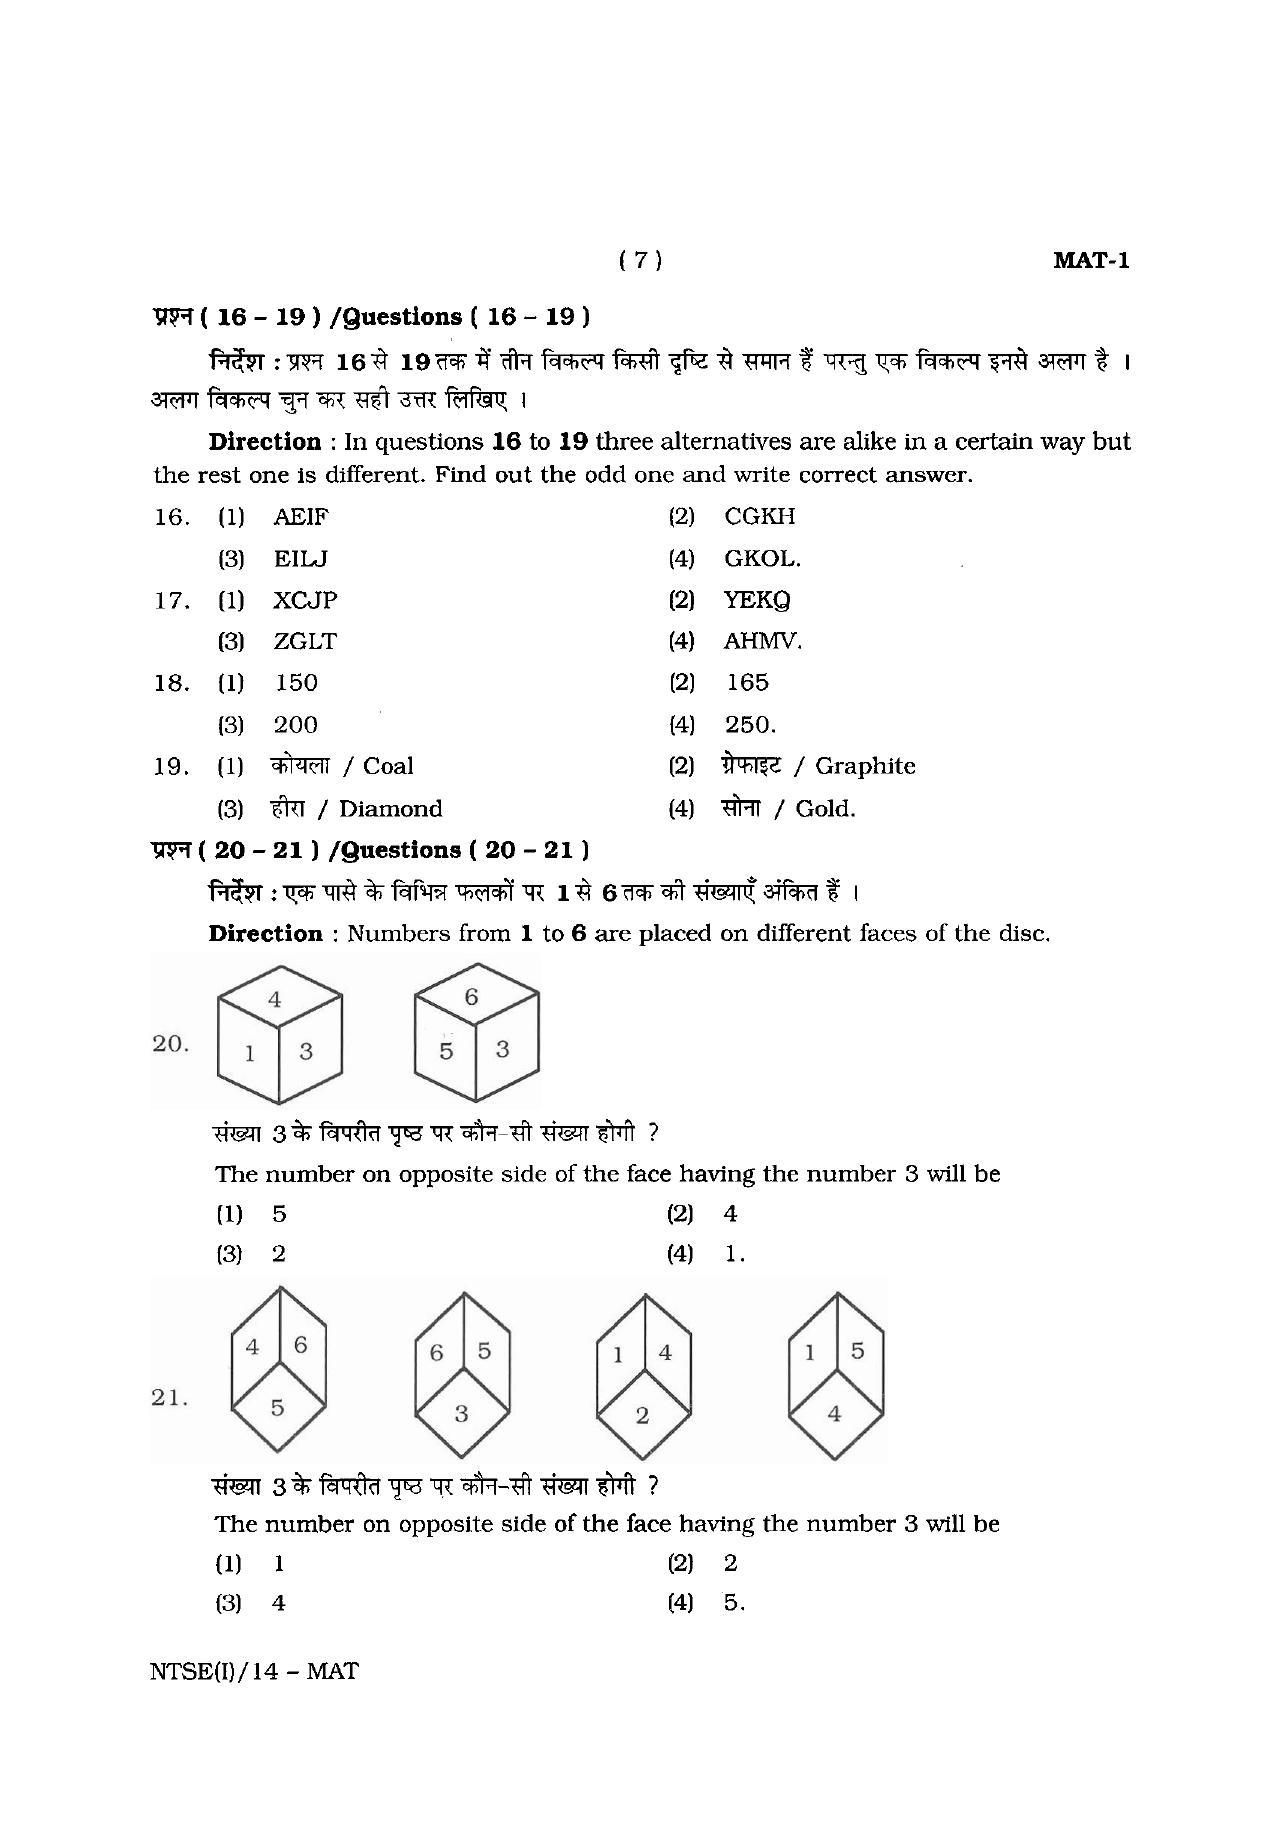 NTSE 2014 (Stage II) MAT Question Paper - Page 7